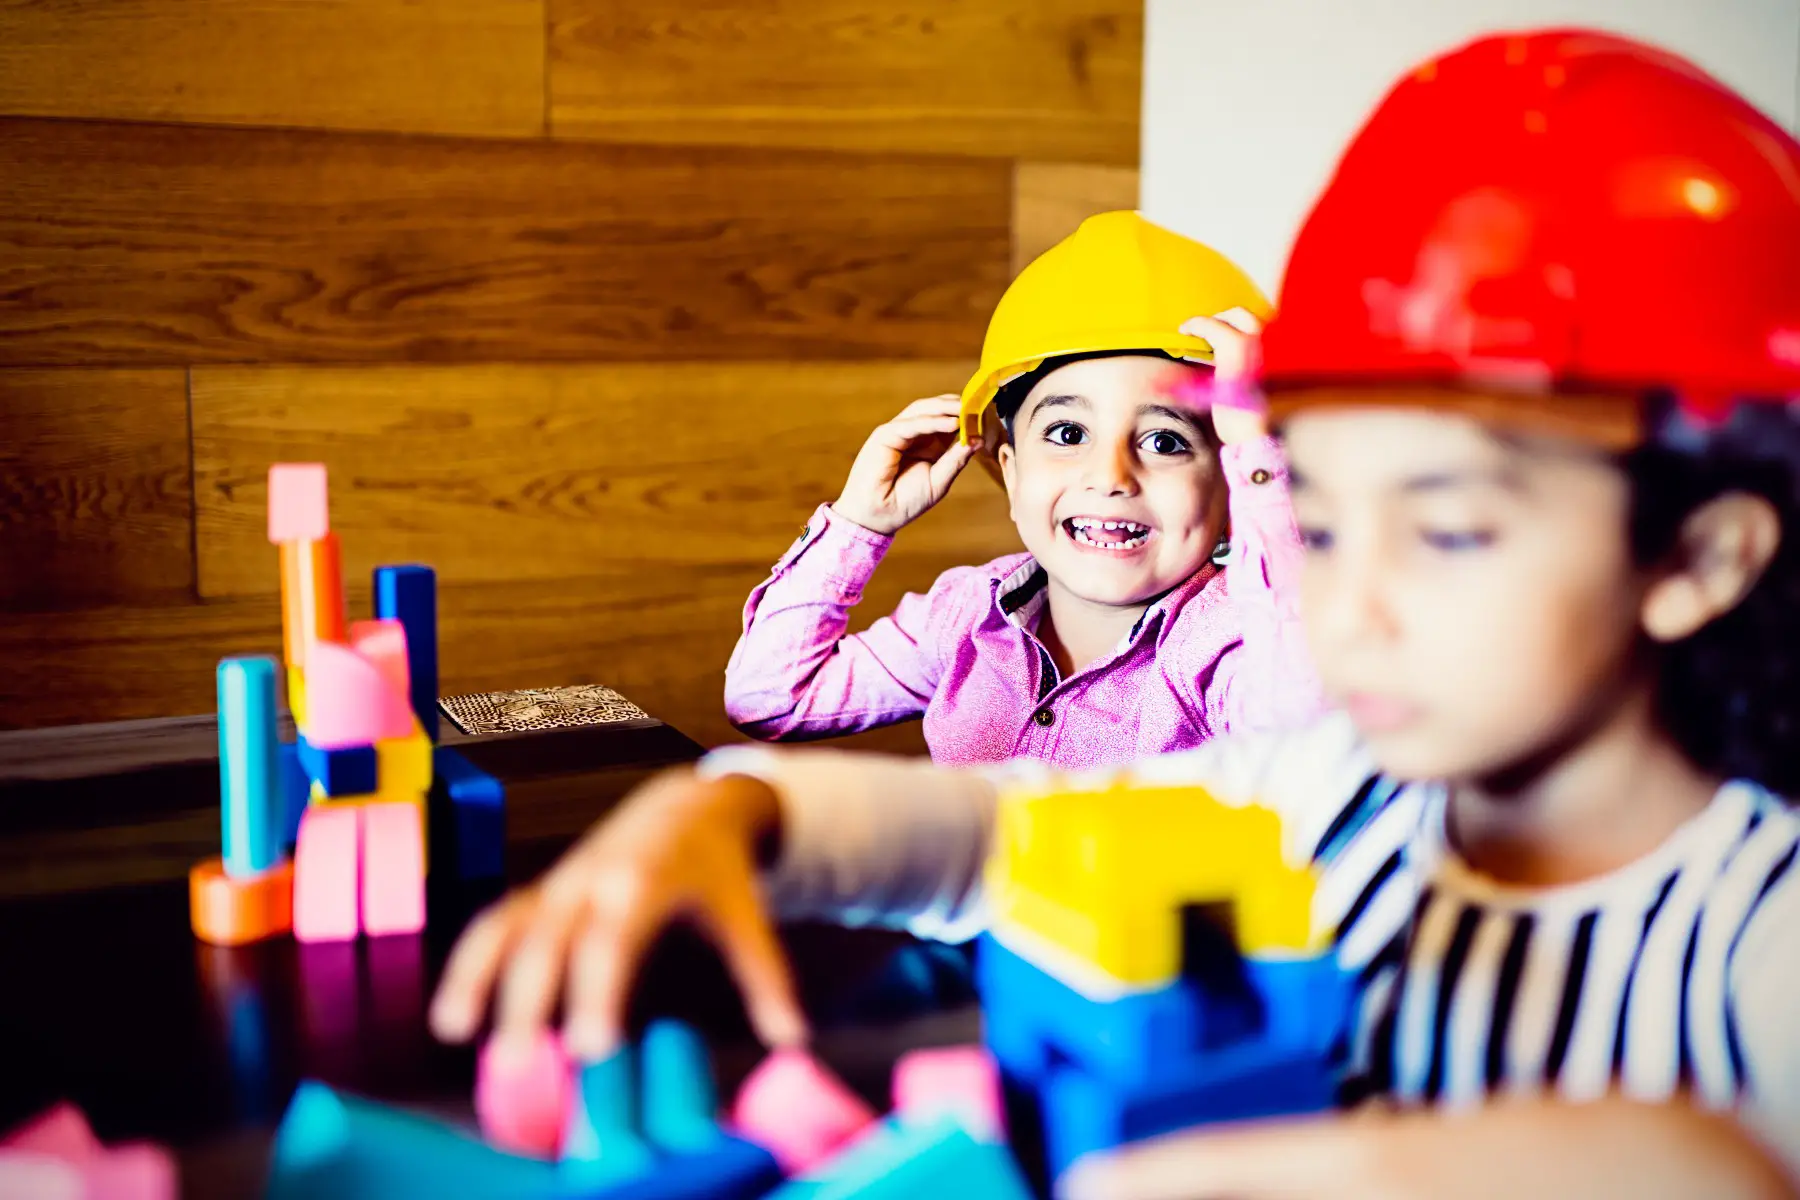 Children playing with building blocks, and wearing builders helmets. One cute kid is looking directly into the camera and smiling.